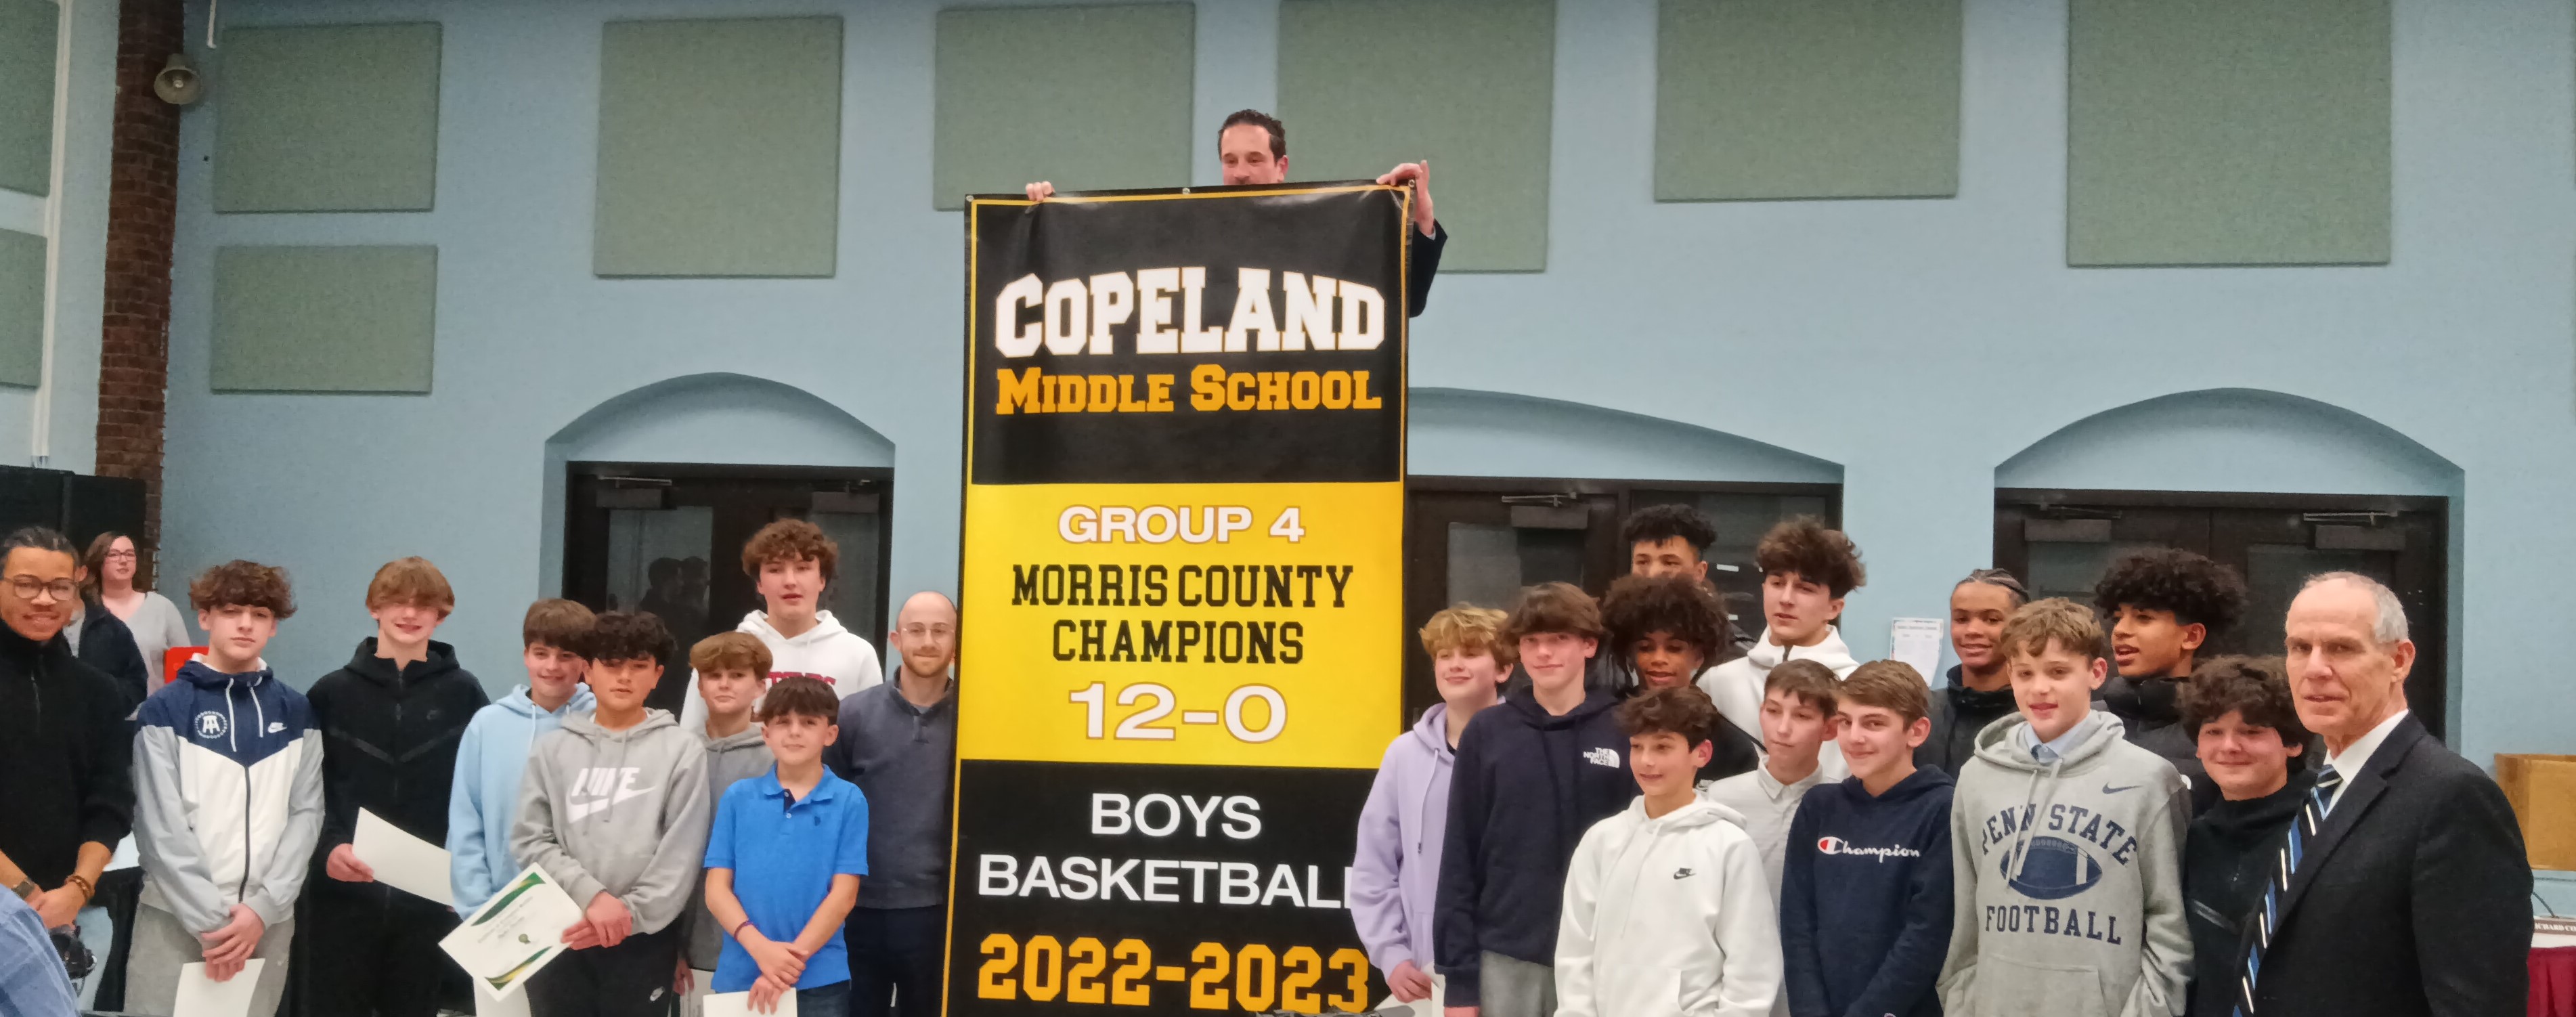 Dr. Corbett standing with students and staff recognizing the Boys Basketball 2022-2023 Morris County Championship